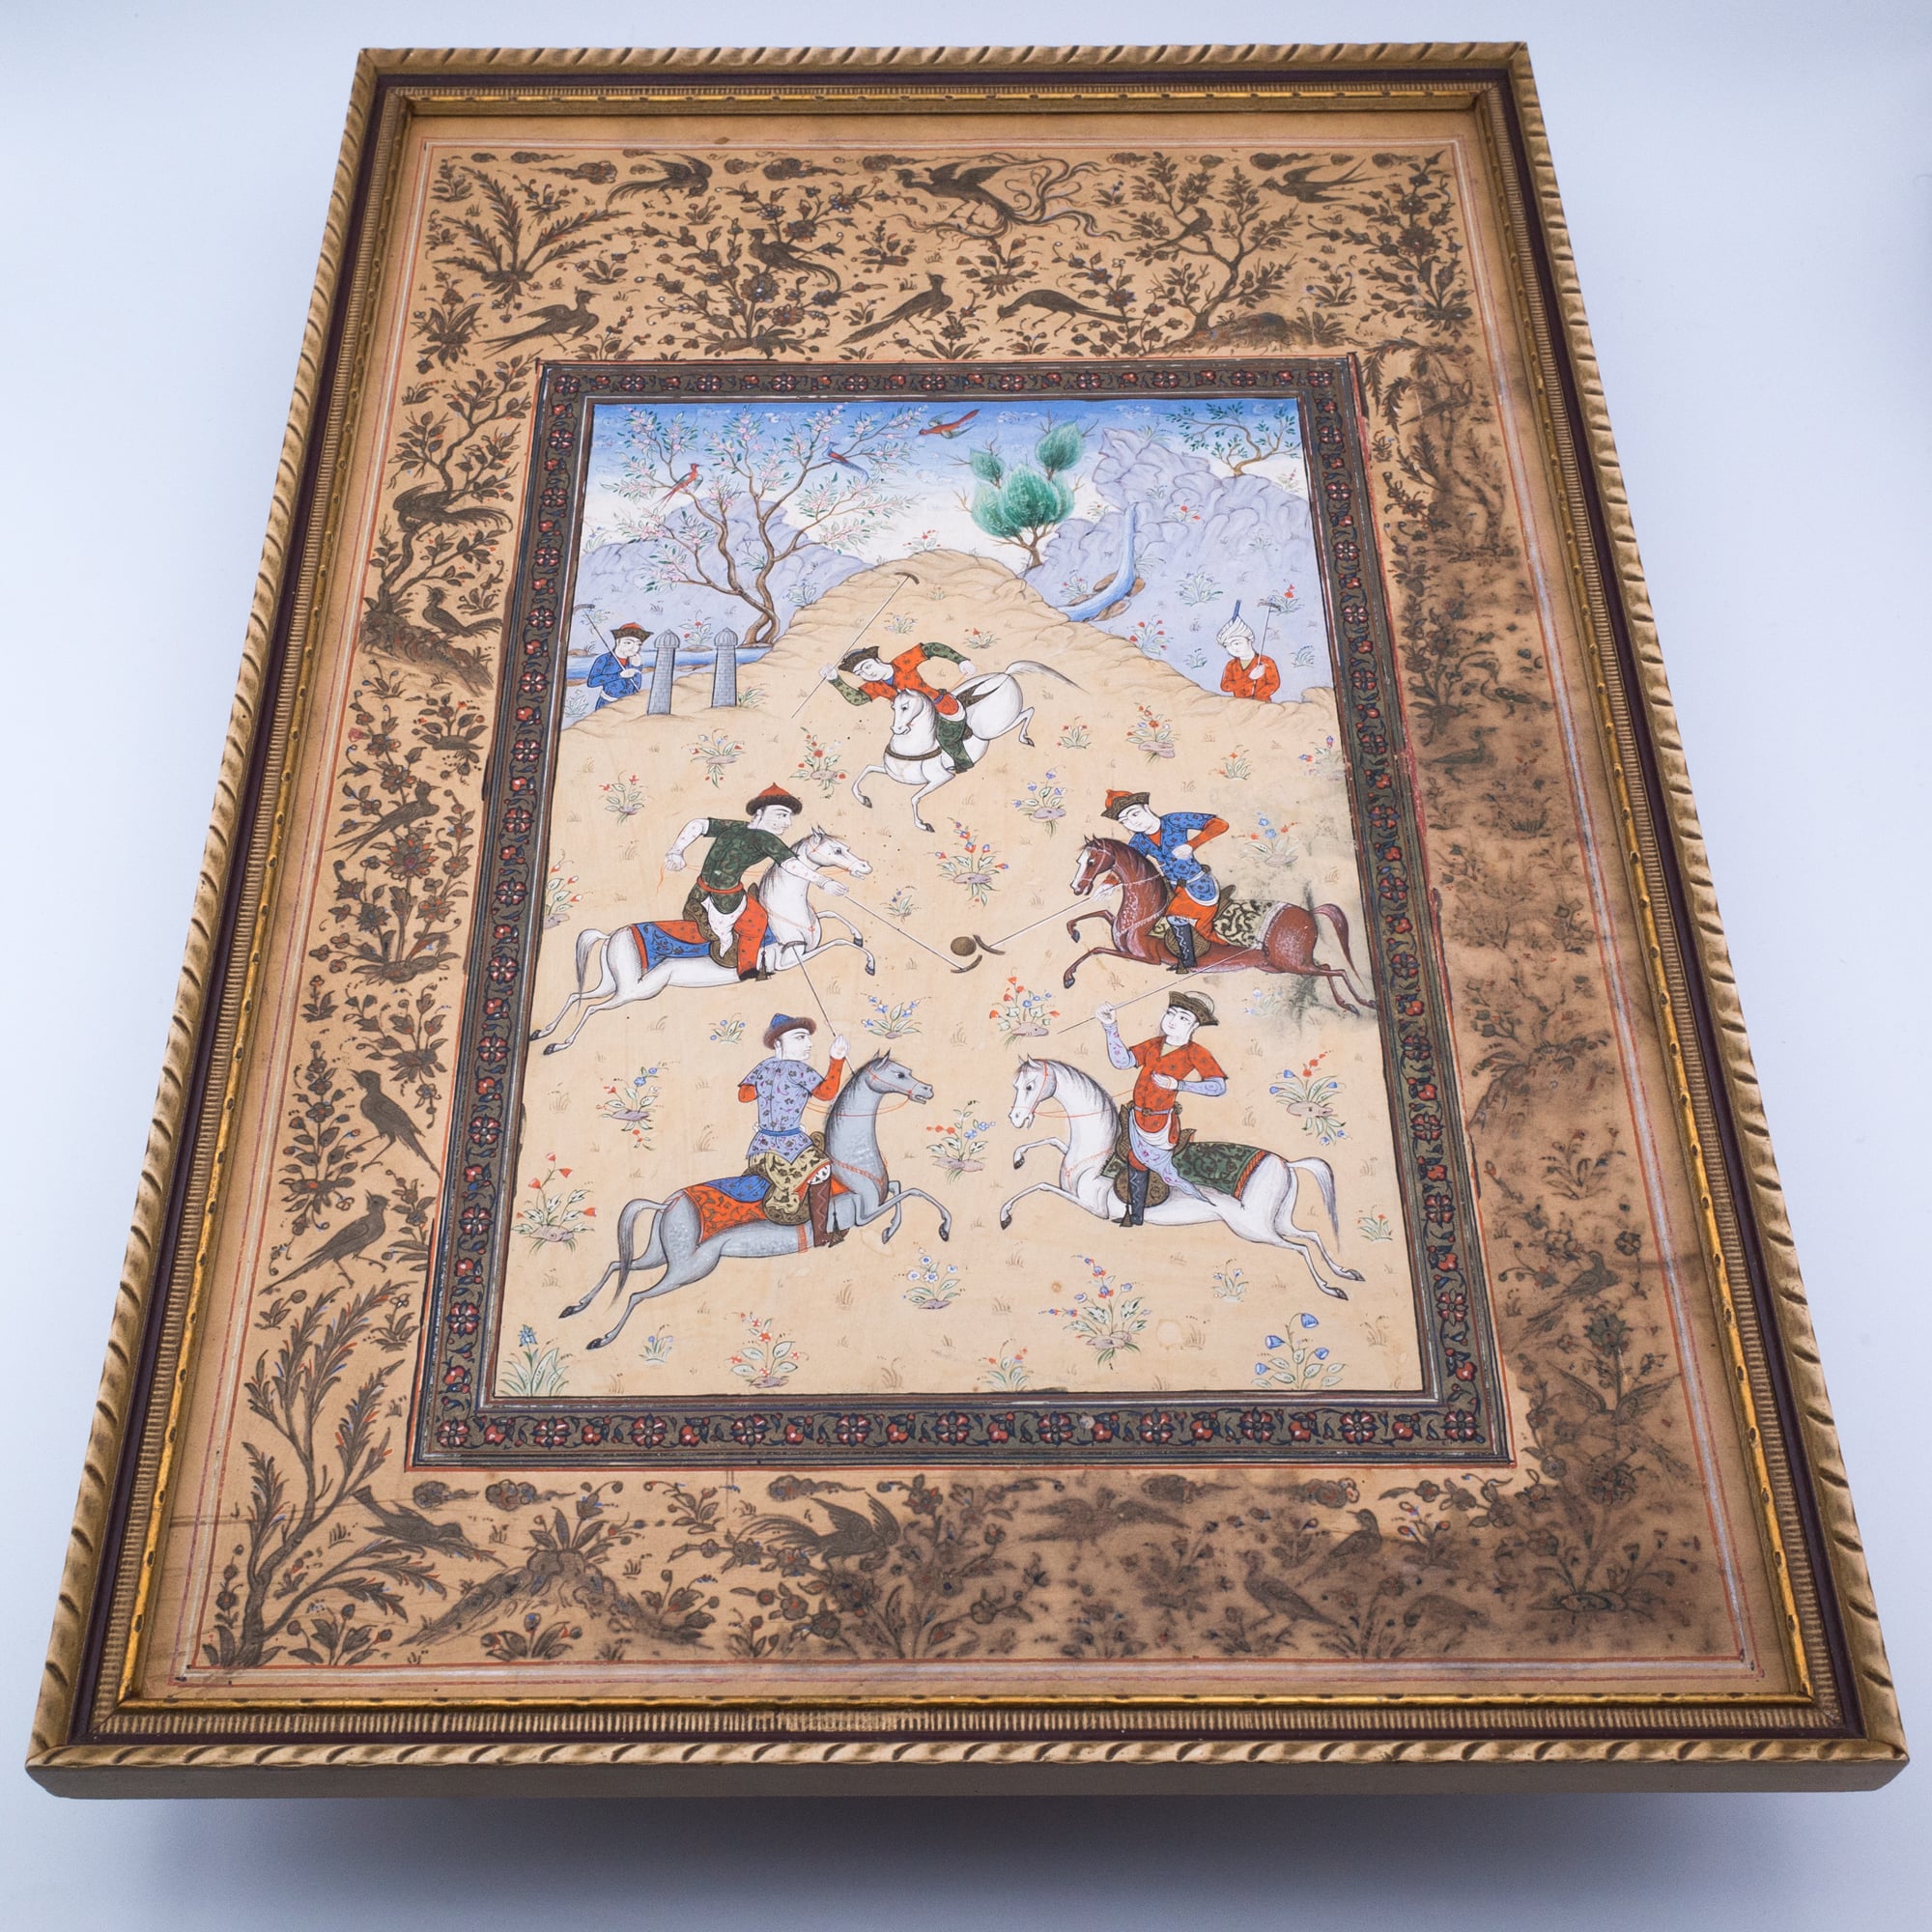 Persian Miniature Painting. [Ancient Game of Polo]. - Raptis Rare